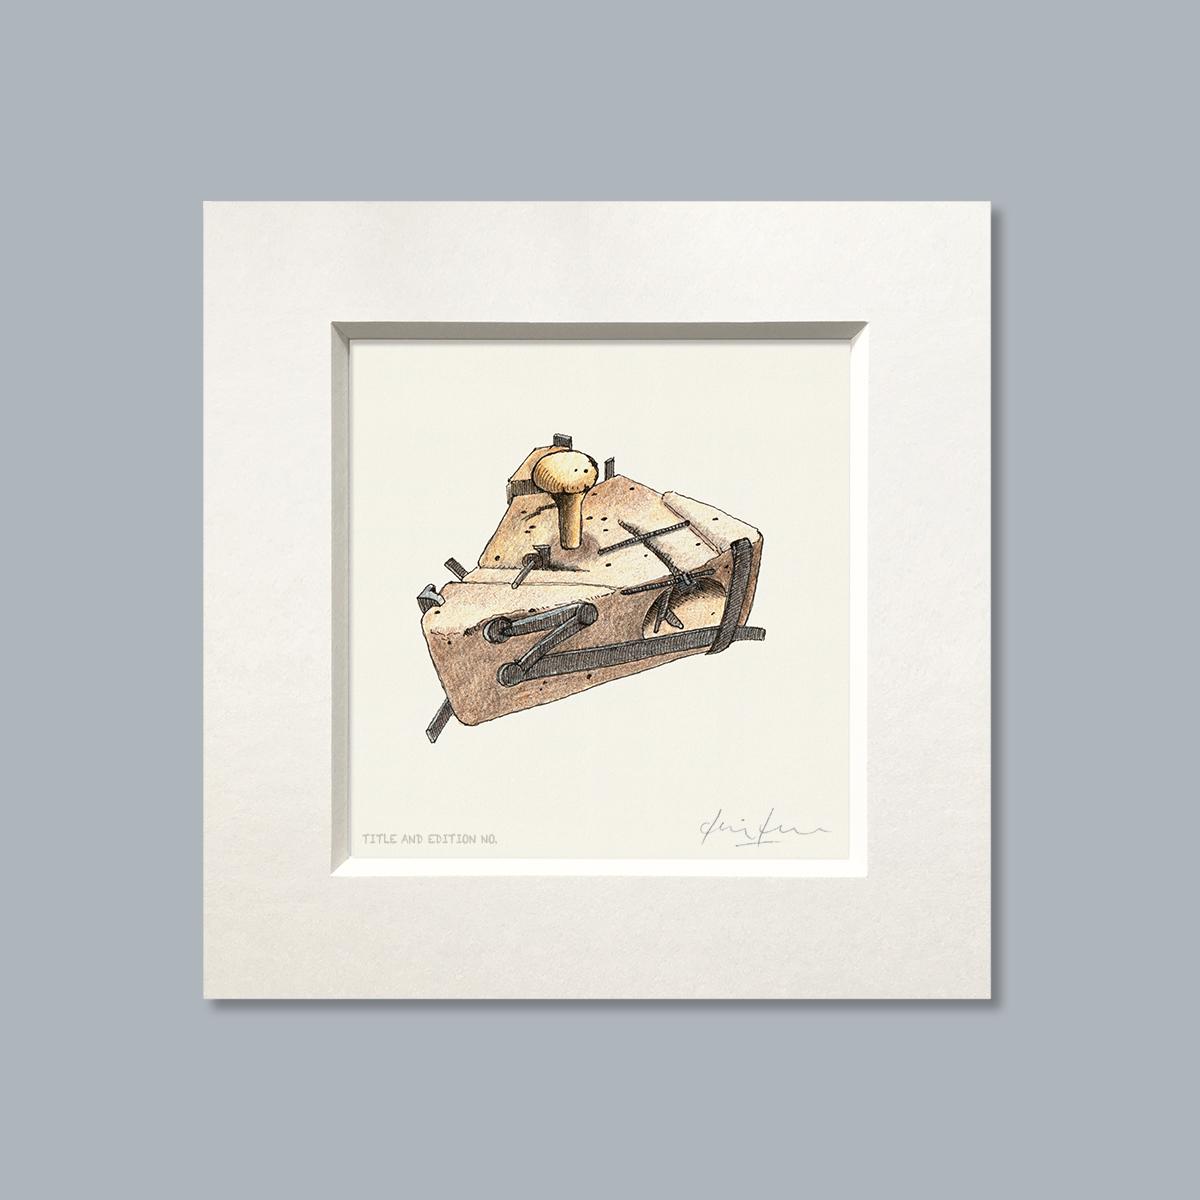 Limited edition print from pen & ink and coloured pencil drawing of an old mousetrap in a white mount